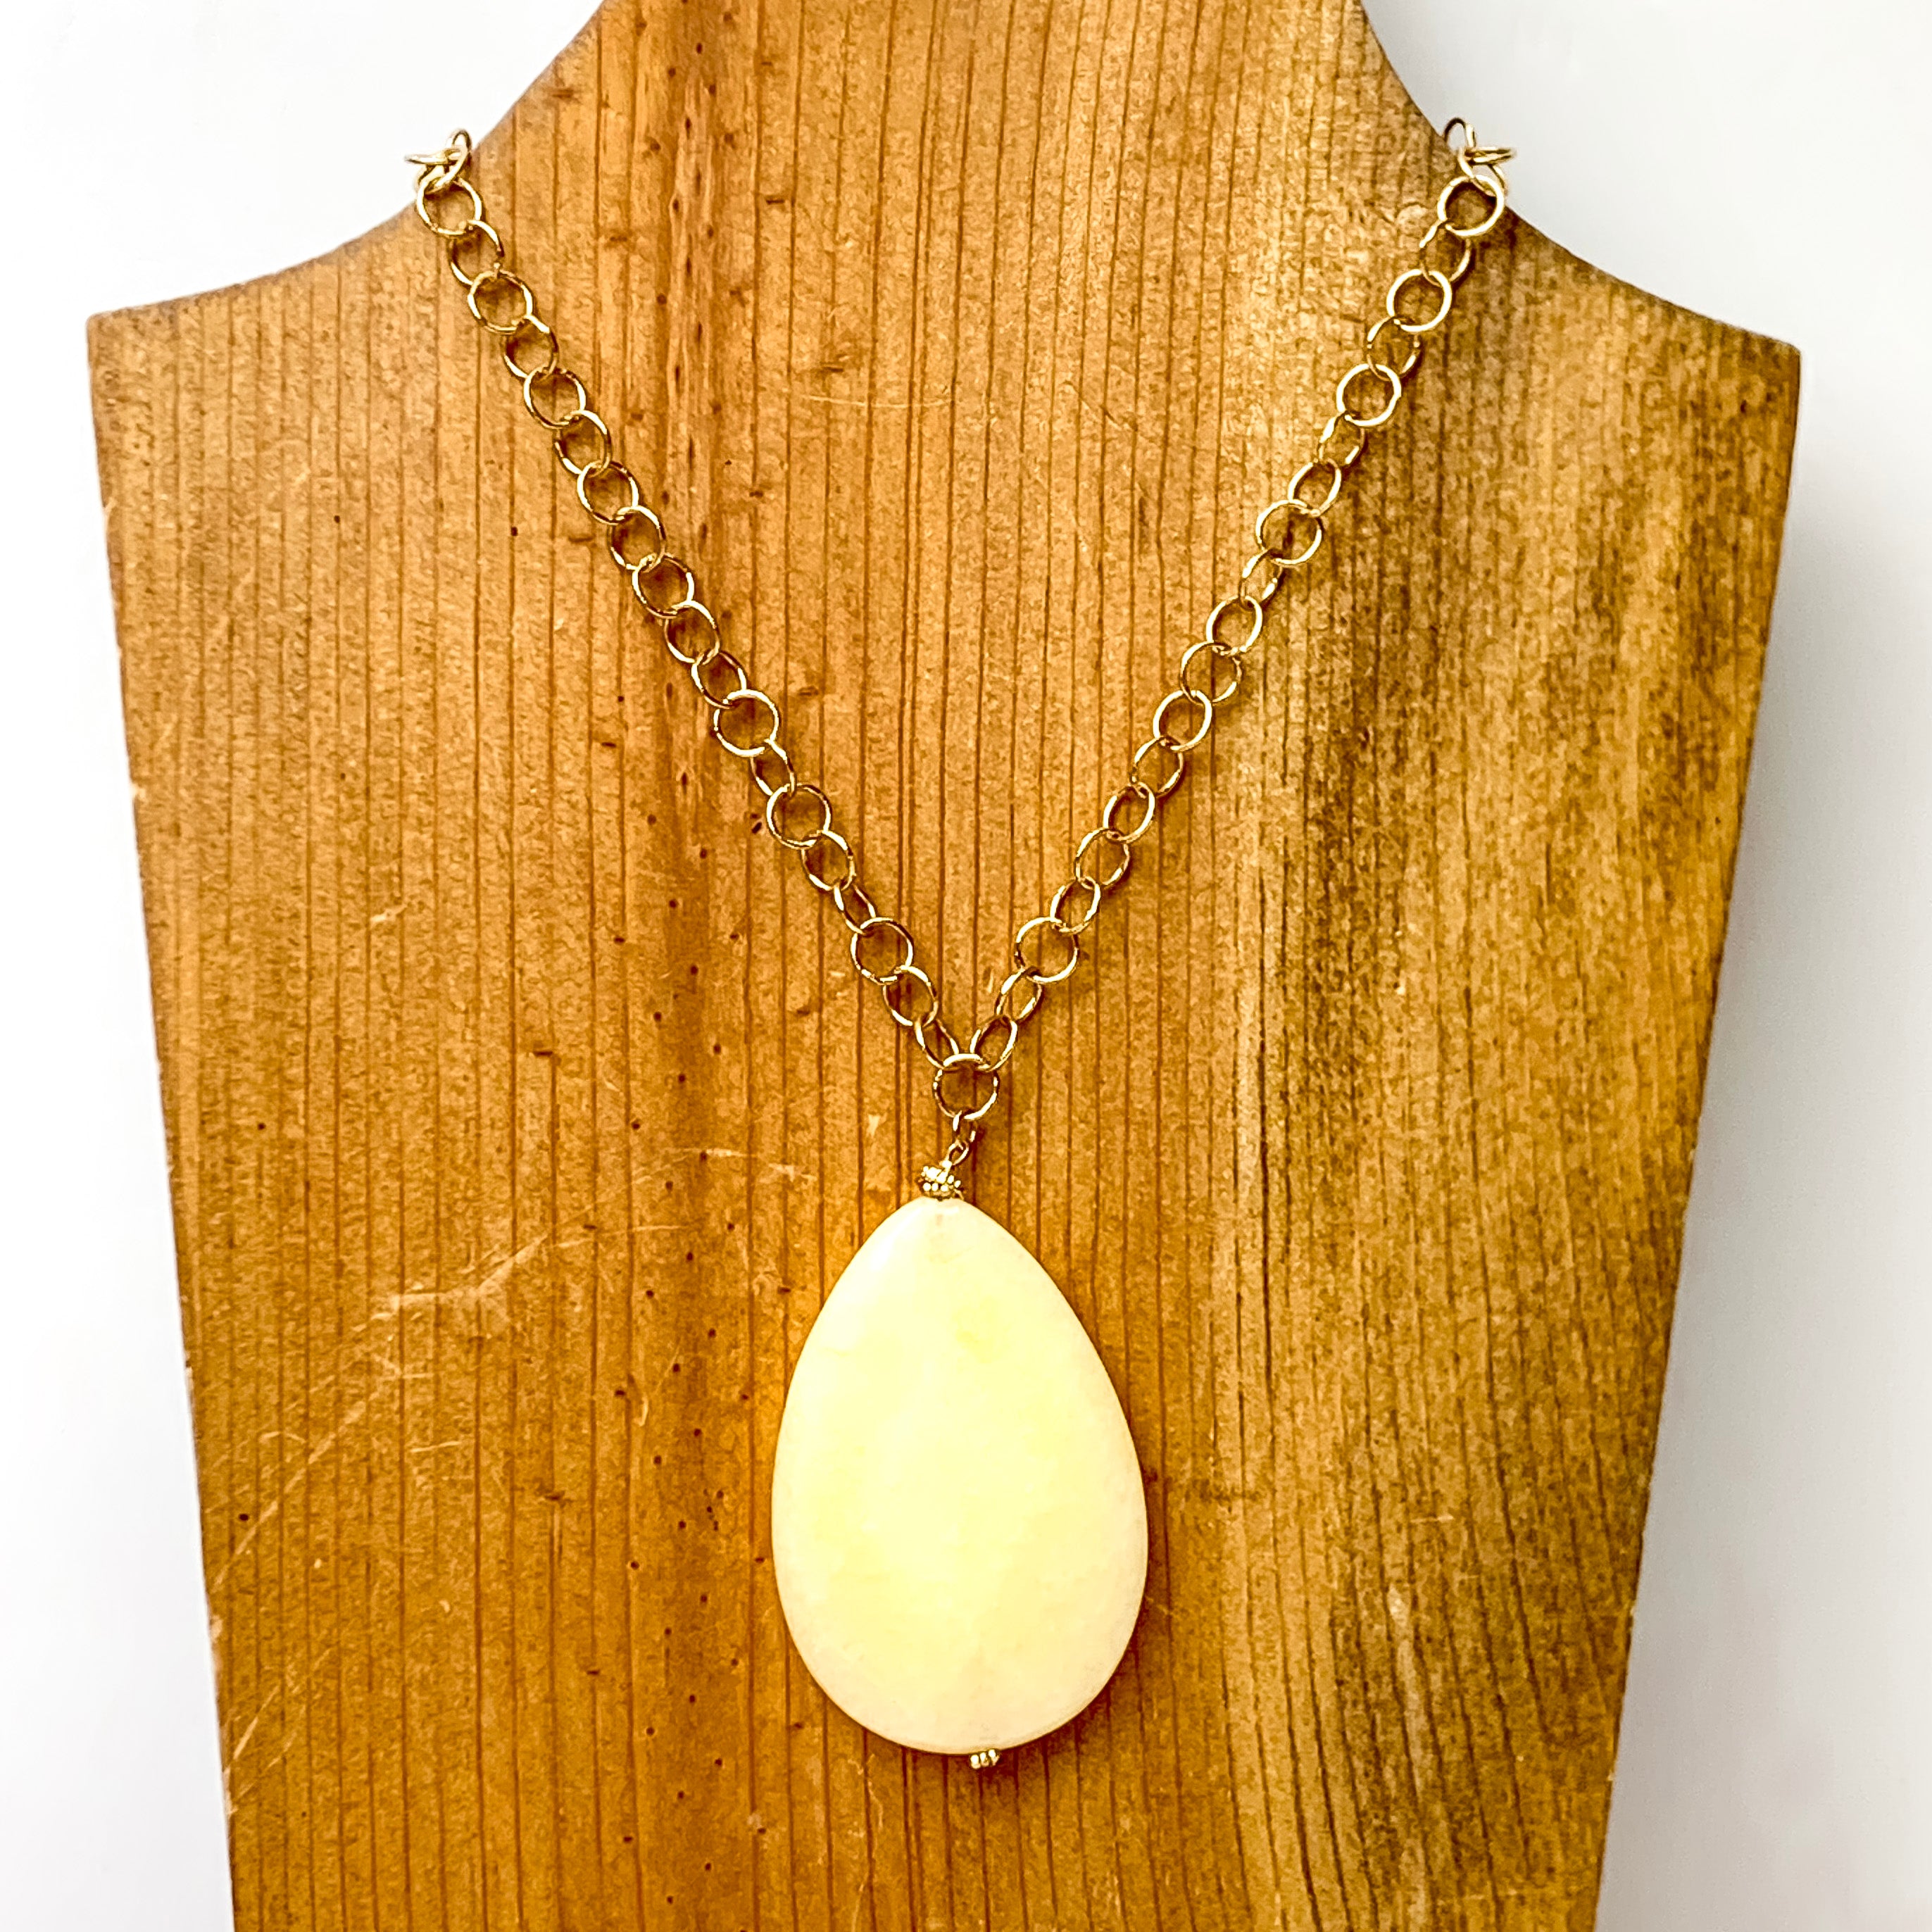 Gold Tone Circle Link Chain Necklace with Ivory Faux Stone Pendant - Giddy Up Glamour Boutique